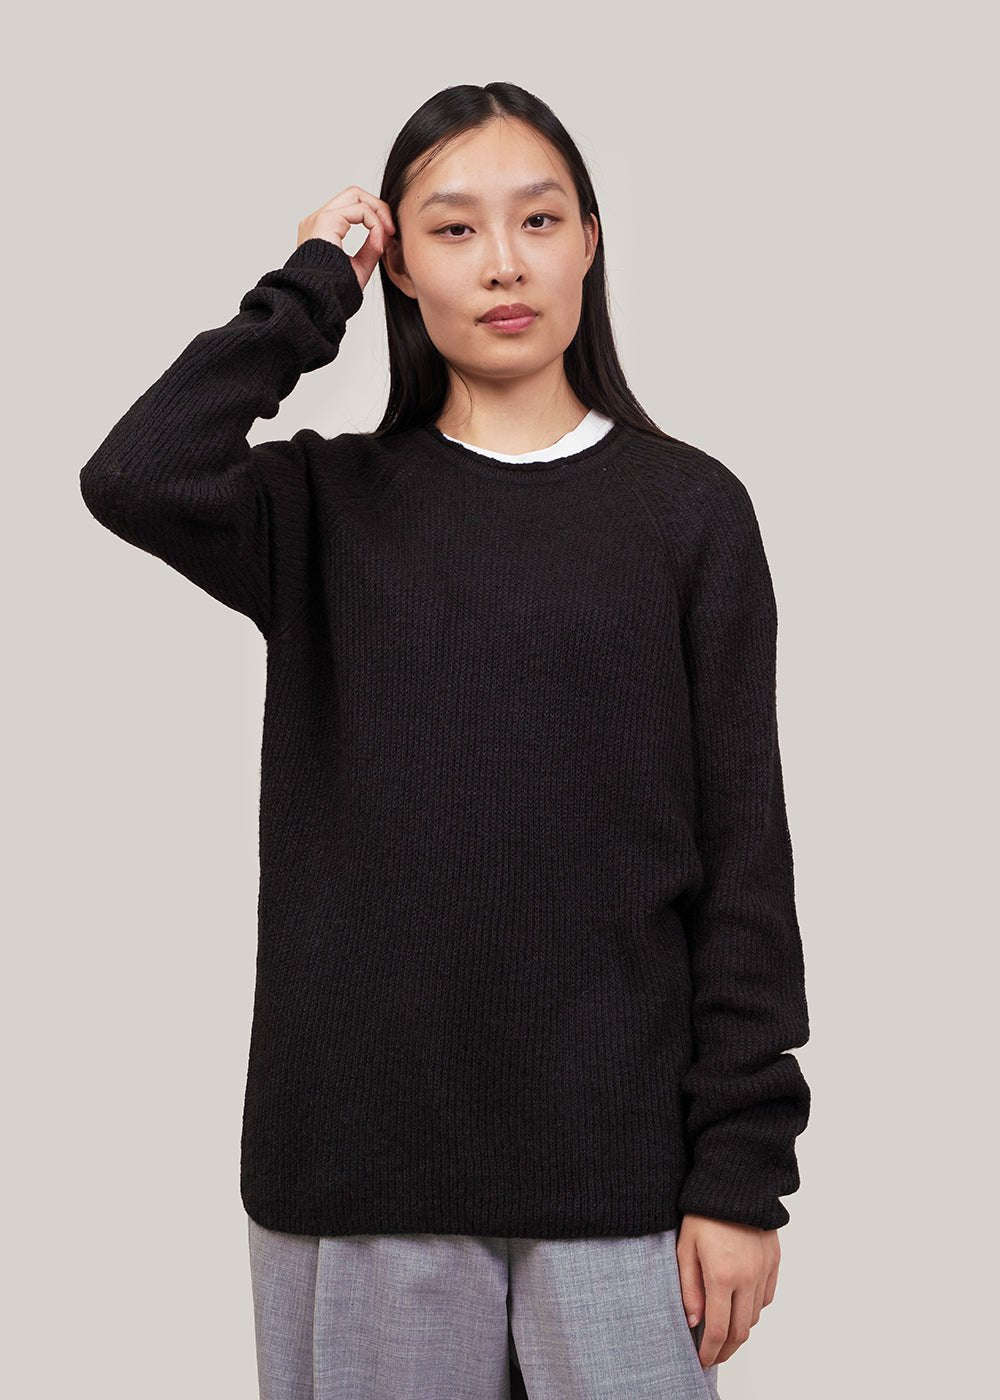 Mijeong Park Black Mohair Blend Crew Neck Sweater - New Classics Studios Sustainable Ethical Fashion Canada